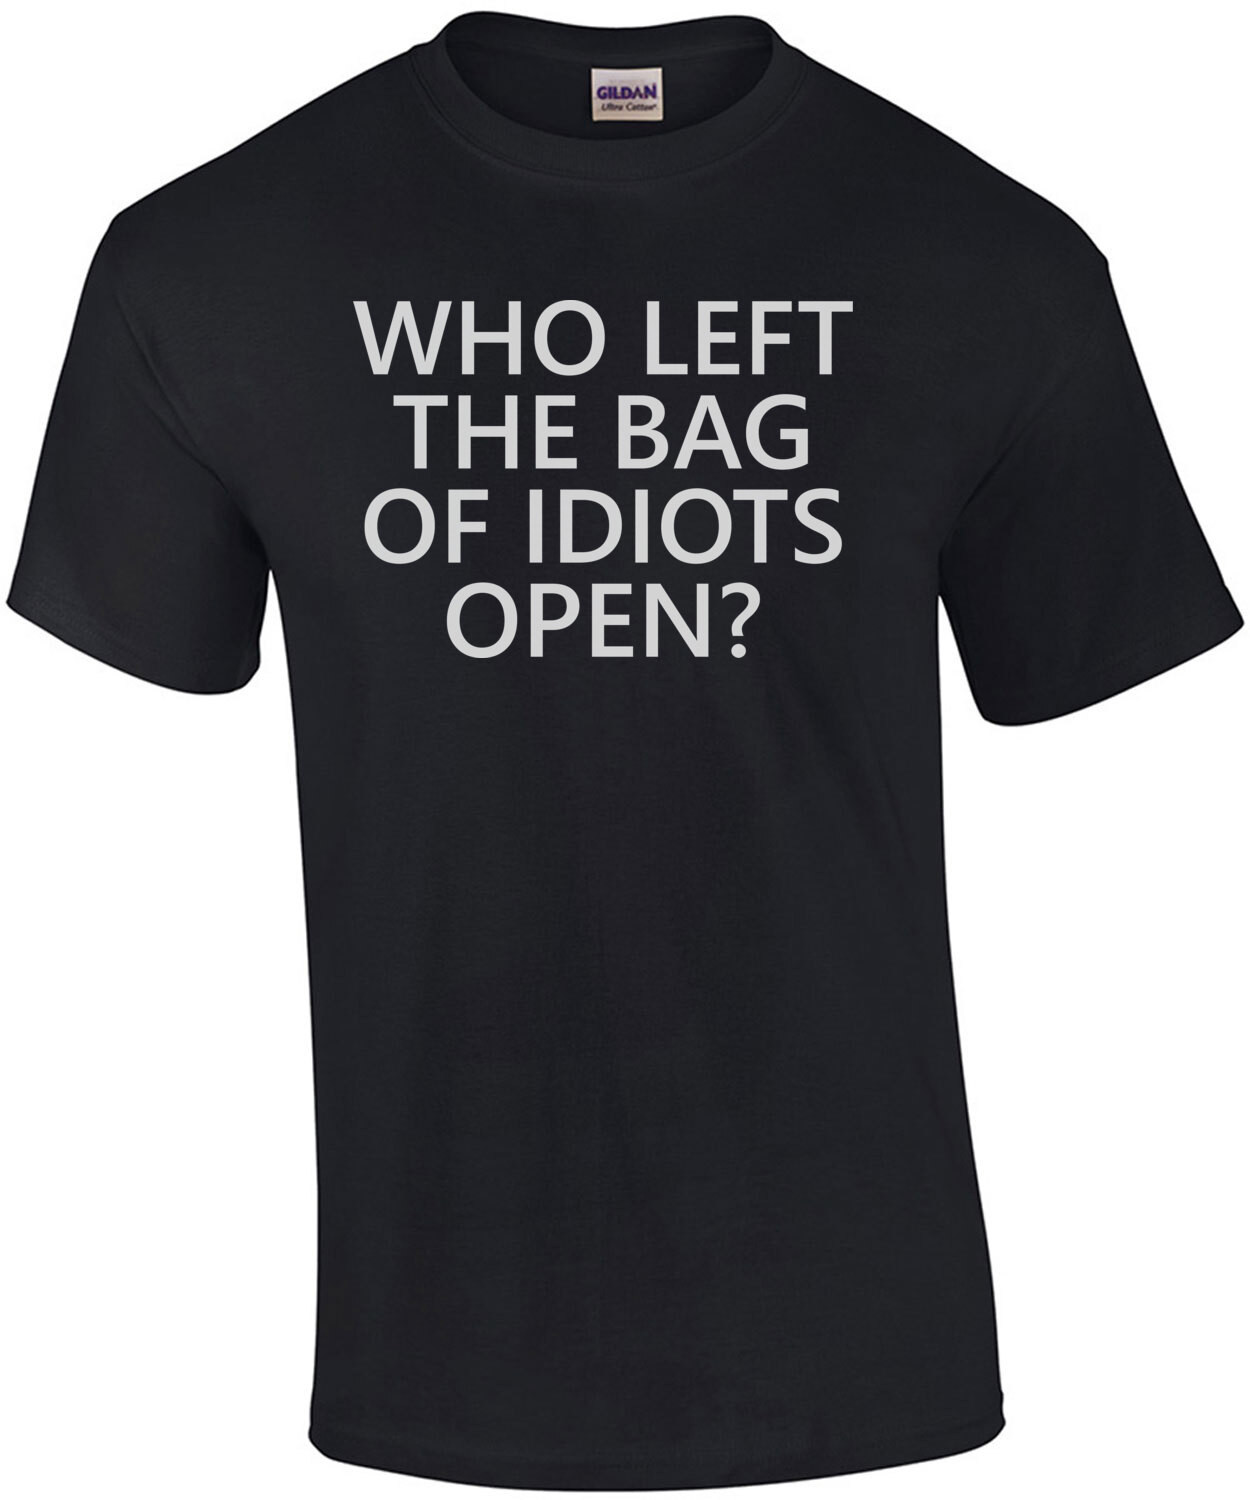 Who left the bag of idiots open? Funny t-shirt